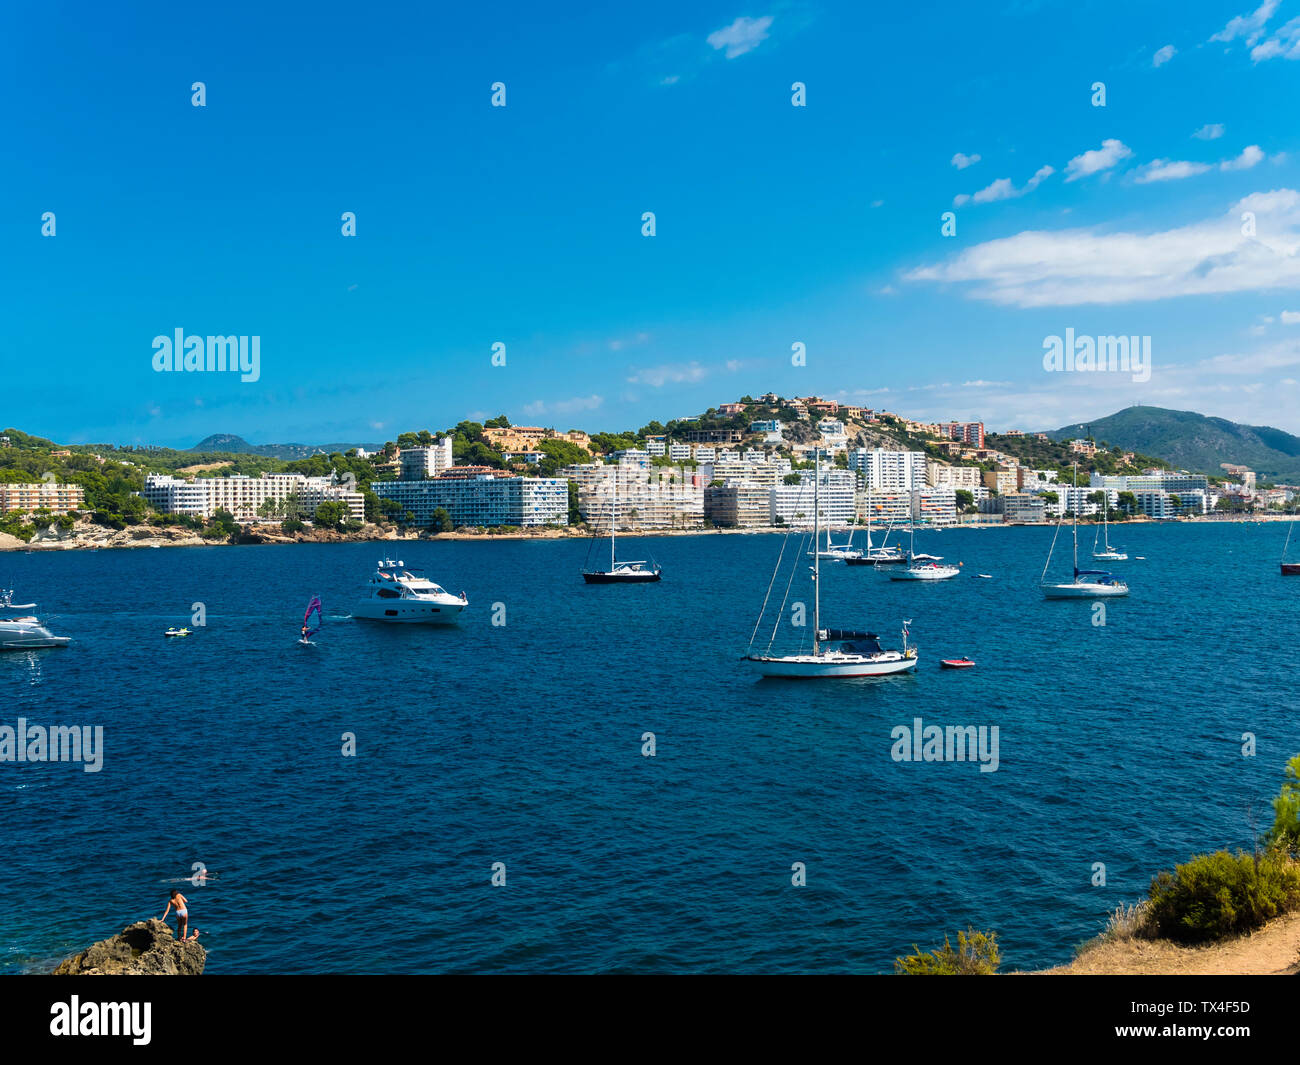 Spain, Balearic Islands, Mallorca, Bay of Santa Ponca, Hotels in the background Stock Photo